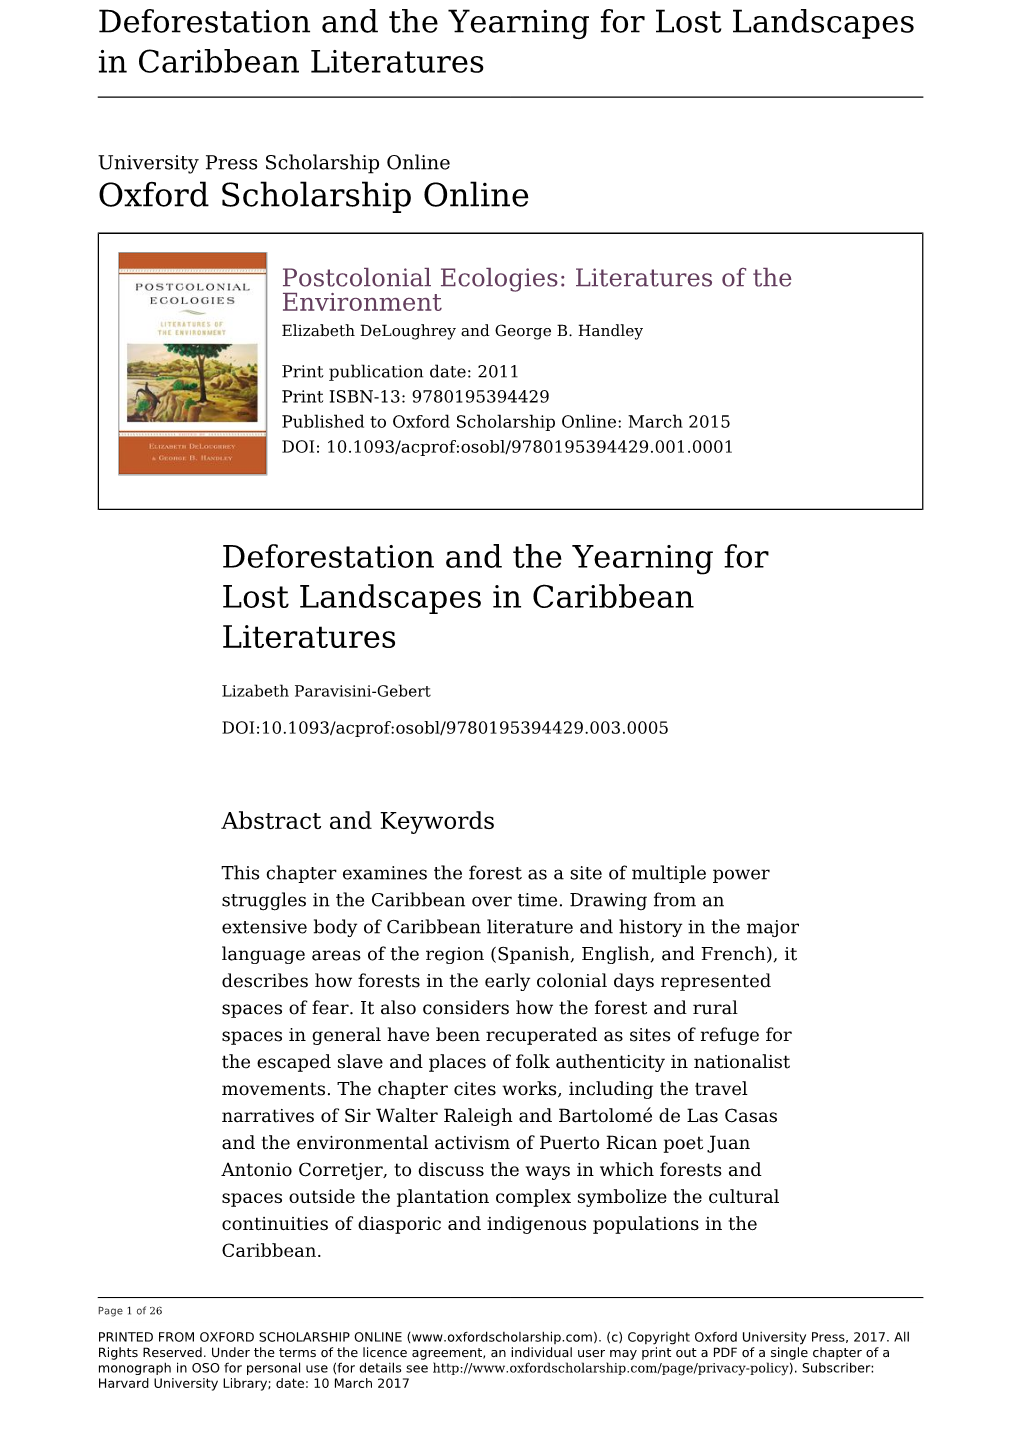 Deforestation and the Yearning for Lost Landscapes in Caribbean Literatures